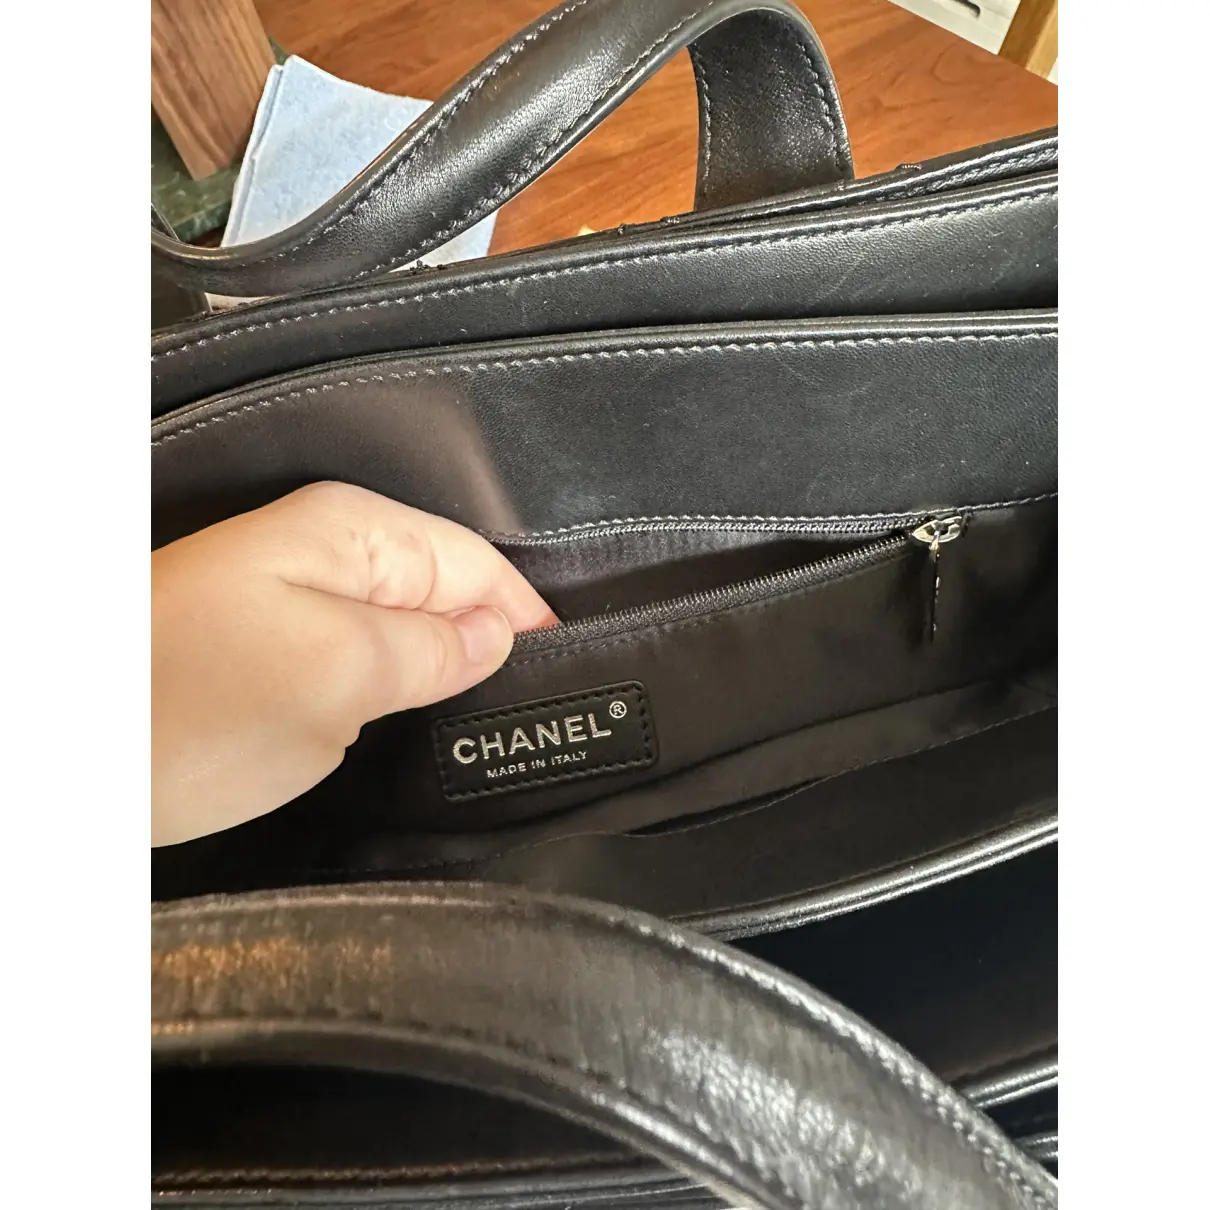 Easy Carry leather satchel Chanel